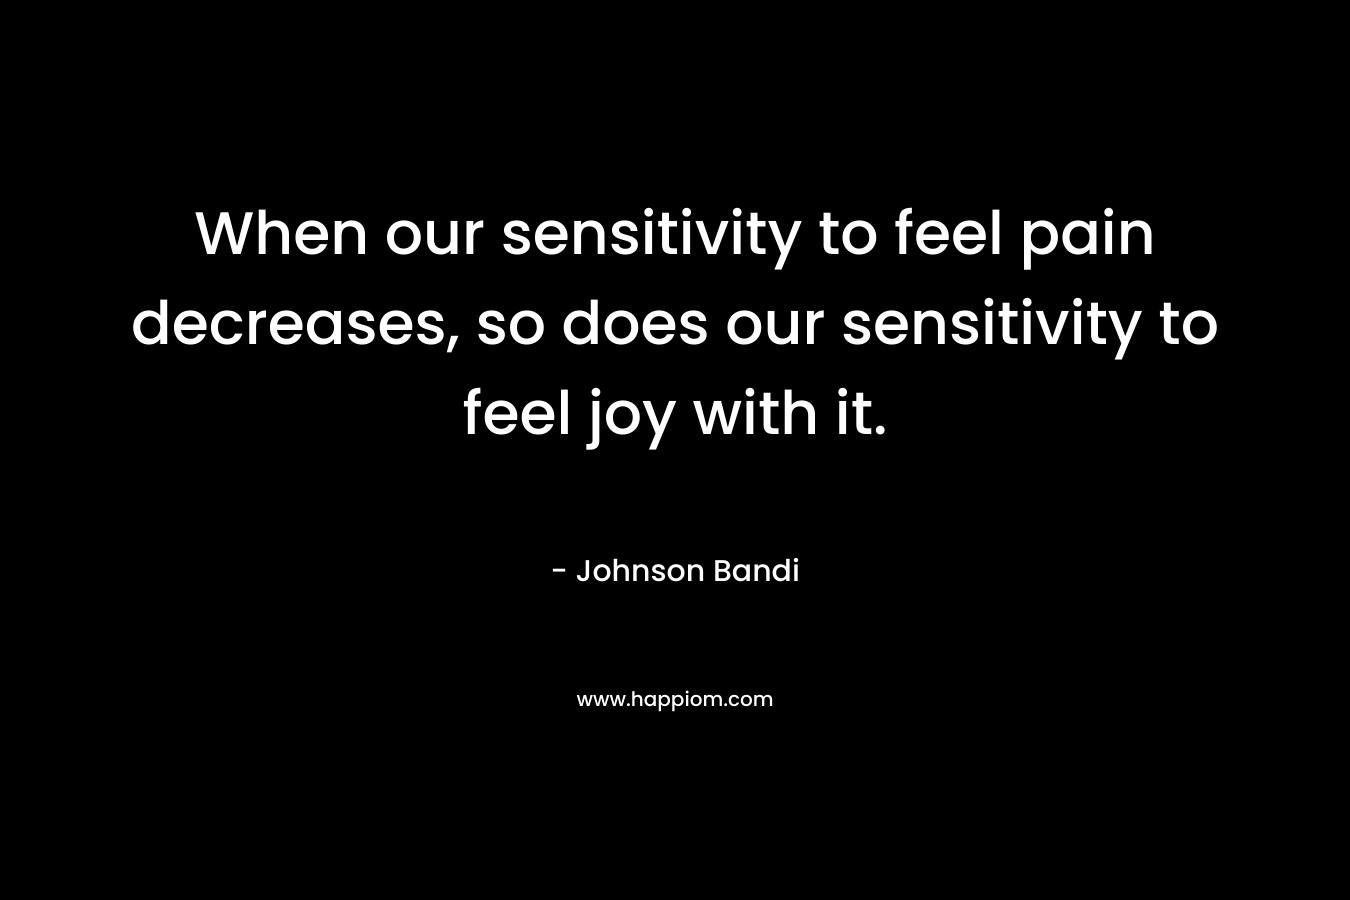 When our sensitivity to feel pain decreases, so does our sensitivity to feel joy with it. – Johnson Bandi